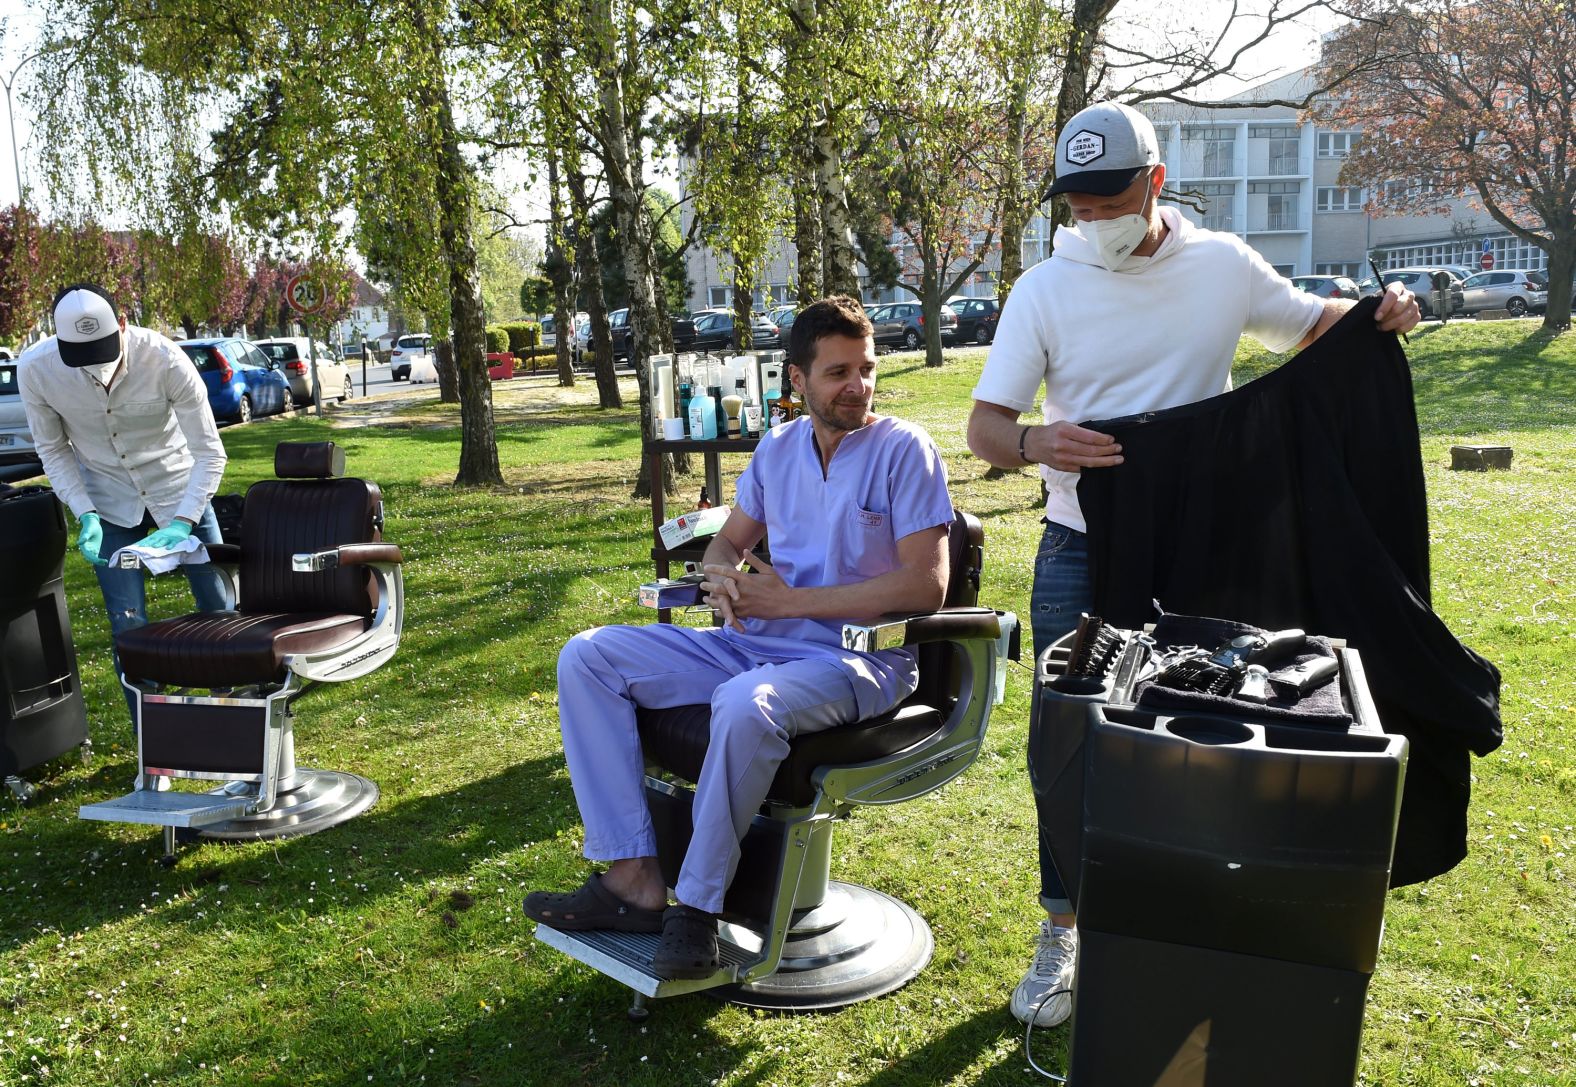 Two hairdressers prepare to give free haircuts to medical workers in front of a hospital in Lens, France, on April 17.